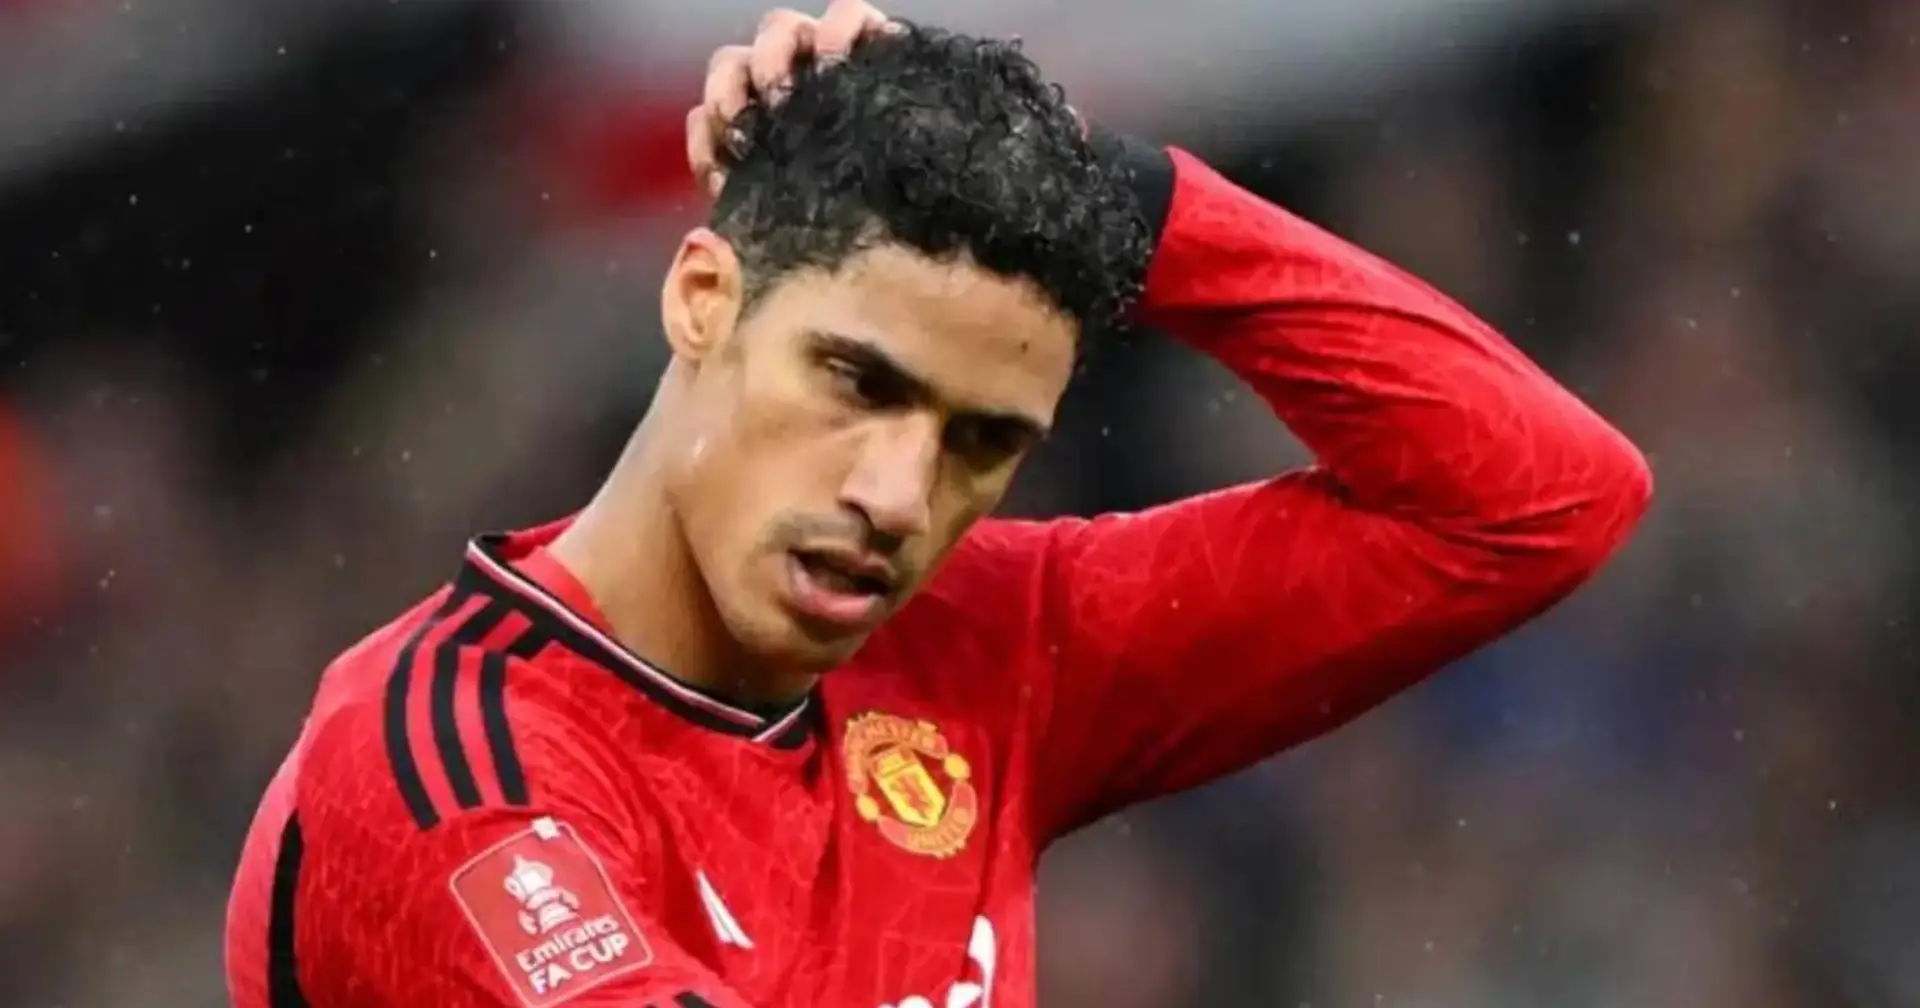 Rapha Varane suffers 11th injury blow since joining Man United, reason for Brentford substitution revealed